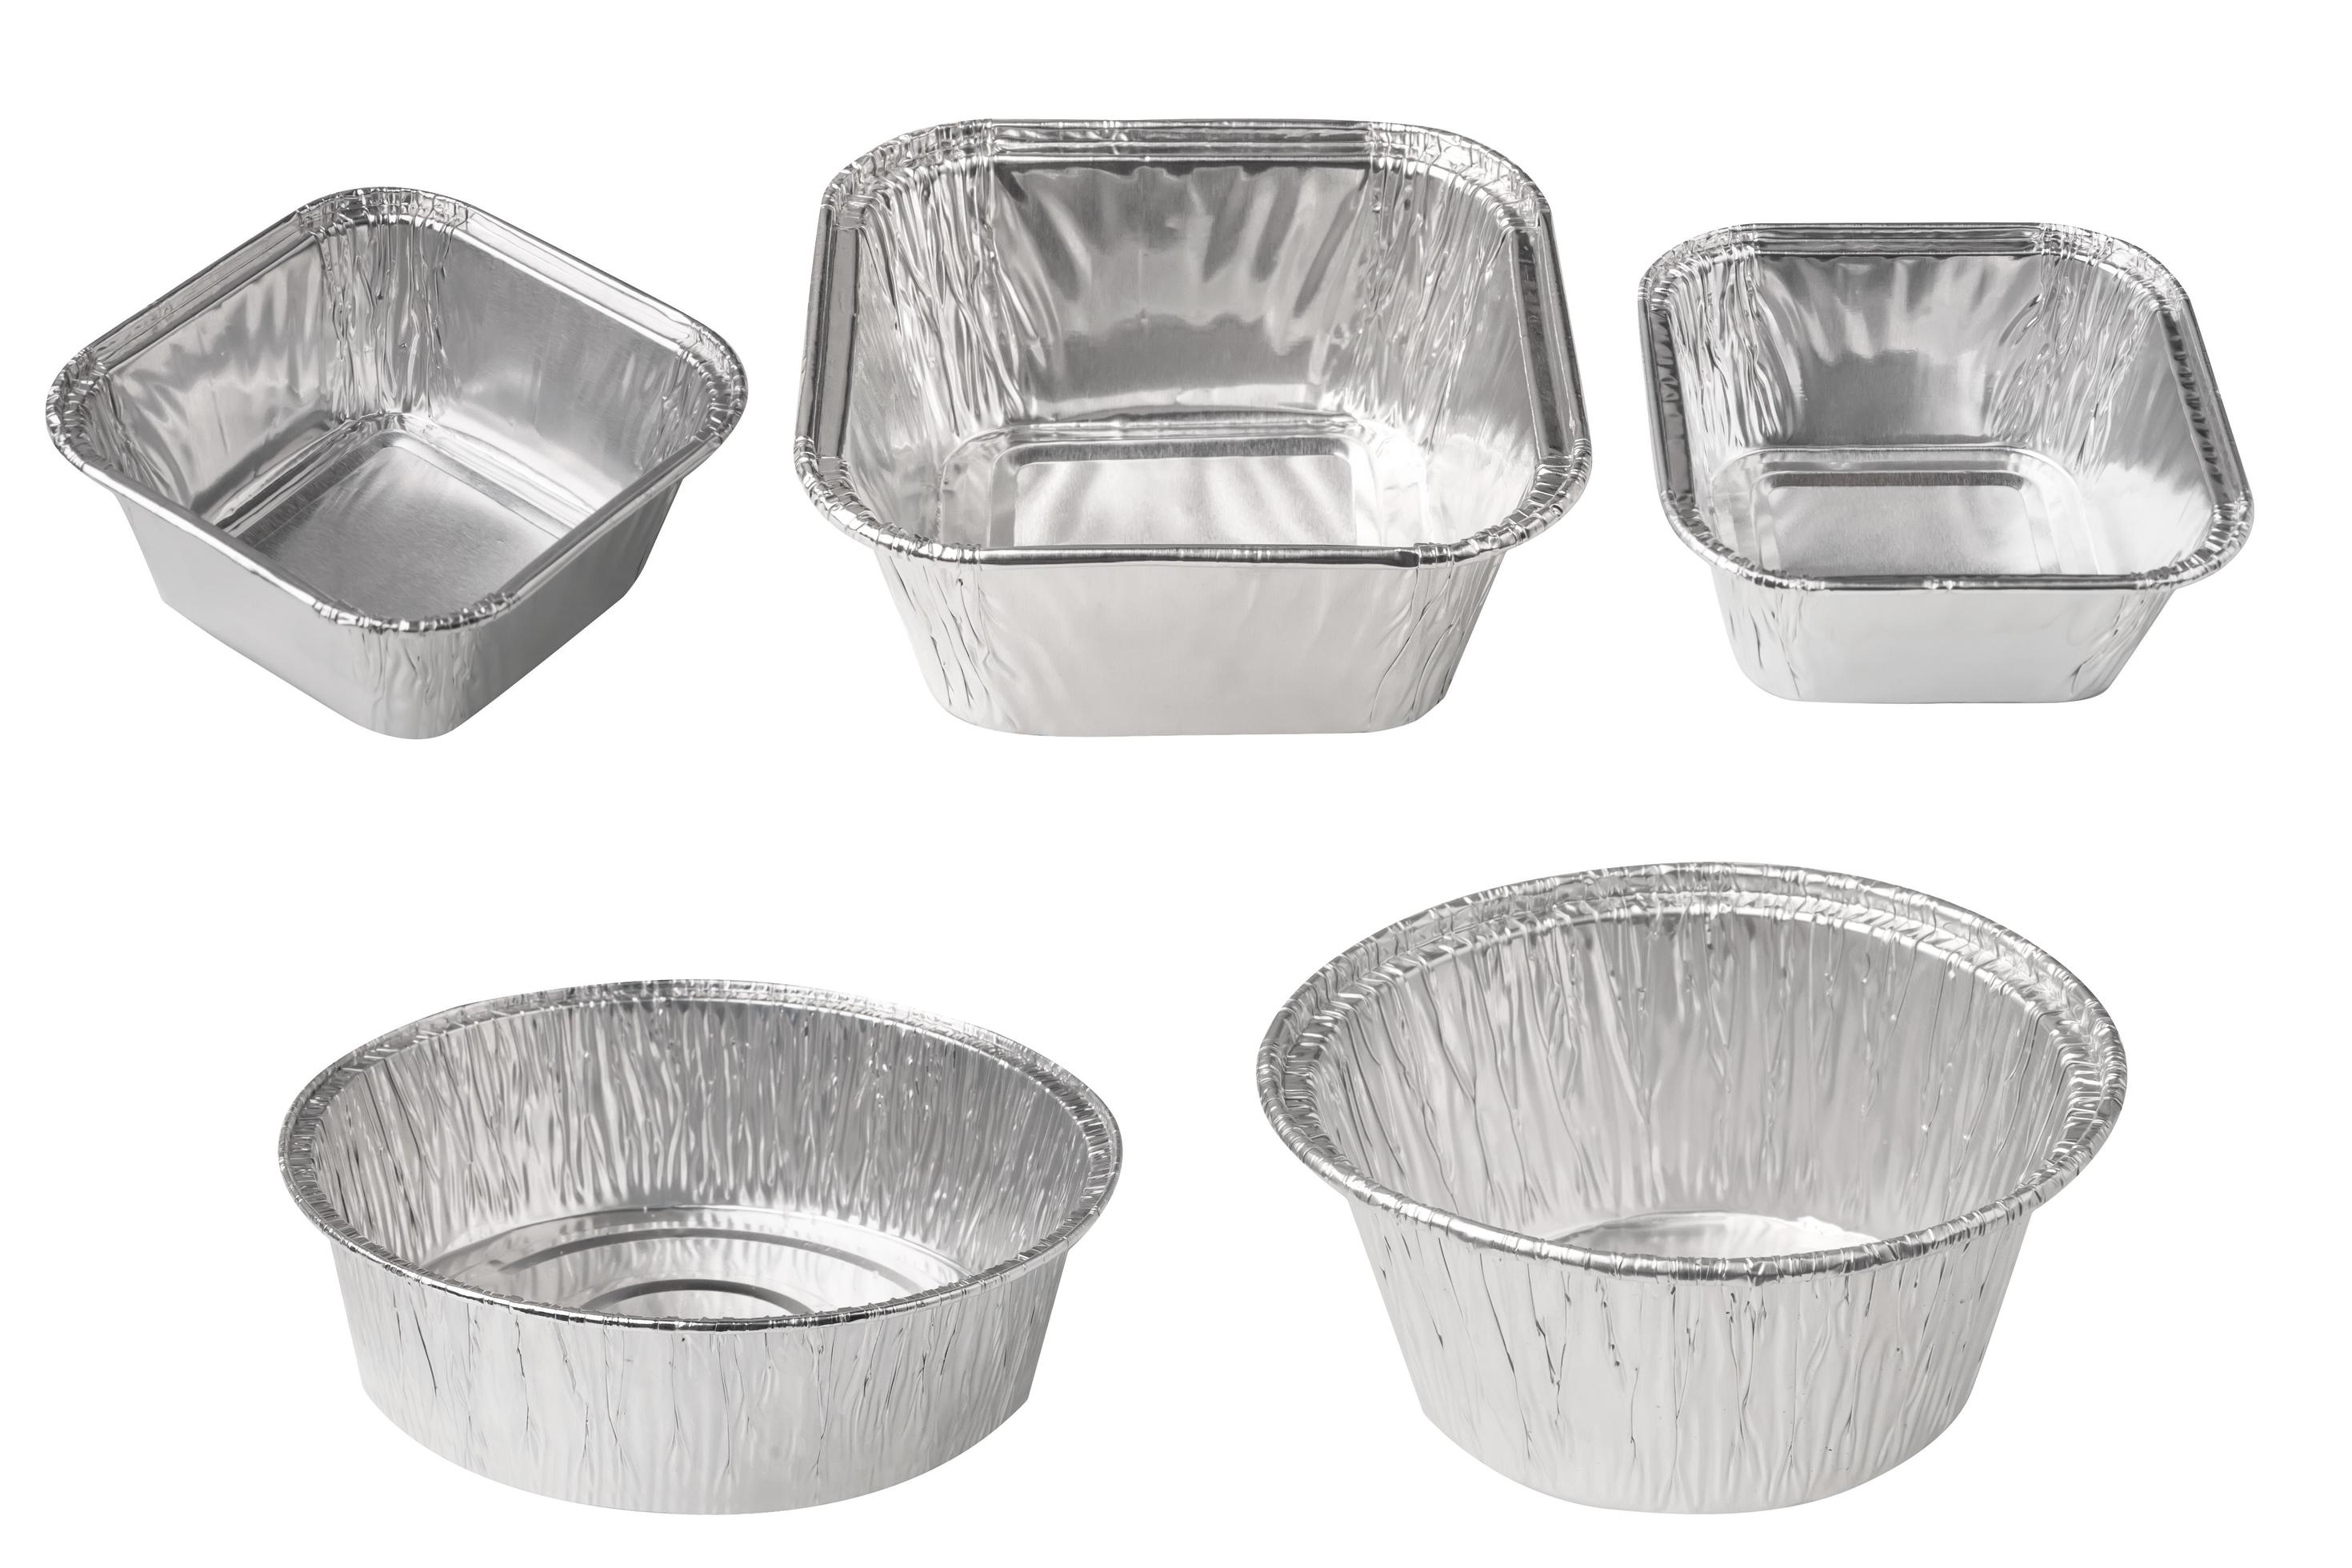 https://static.vecteezy.com/system/resources/previews/007/135/683/large_2x/foil-baking-cup-aluminum-cupcakes-or-dessert-cups-isolated-on-white-background-free-photo.jpg